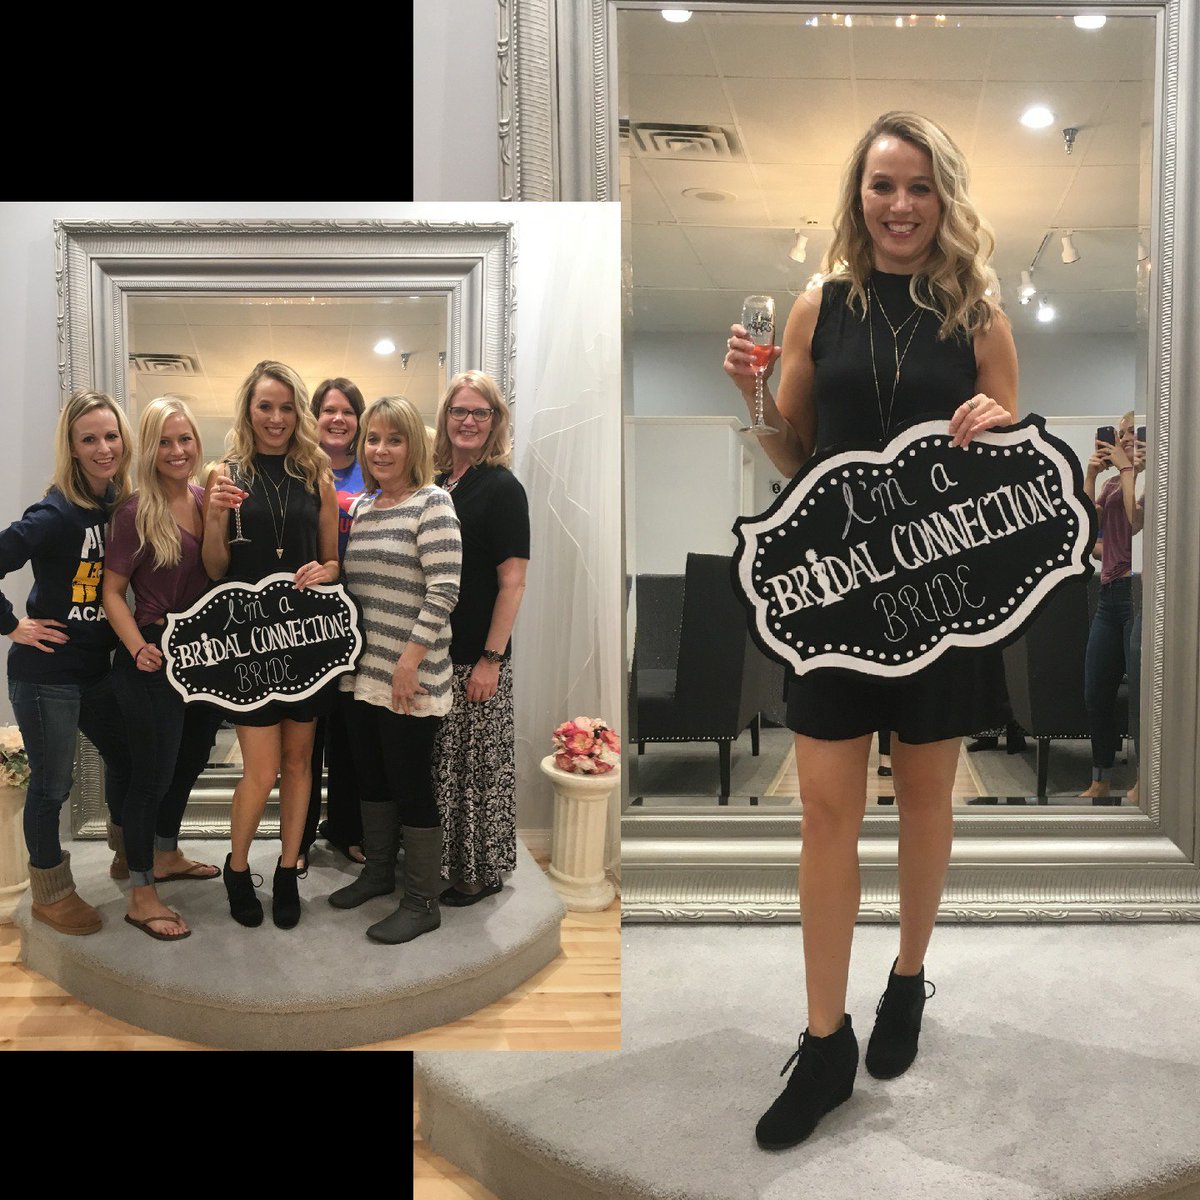 Joy said #yestothdress and joined our #tbcfamily! She will be a beautiful elegant bride and we can't wait to see photos!